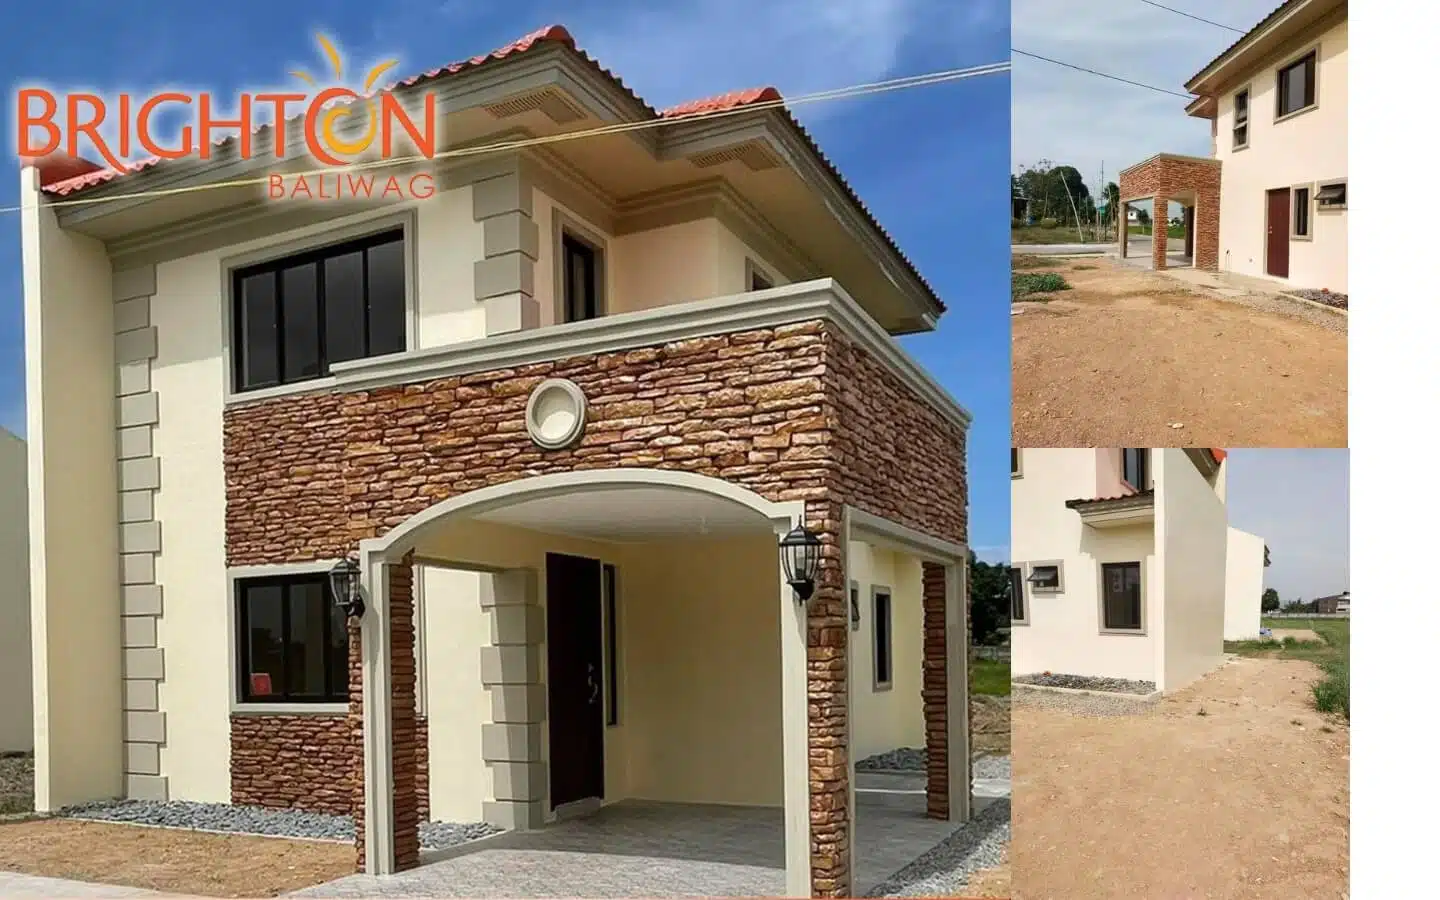 Actual image Belmont Ready for occupancy - Brighton baliwag